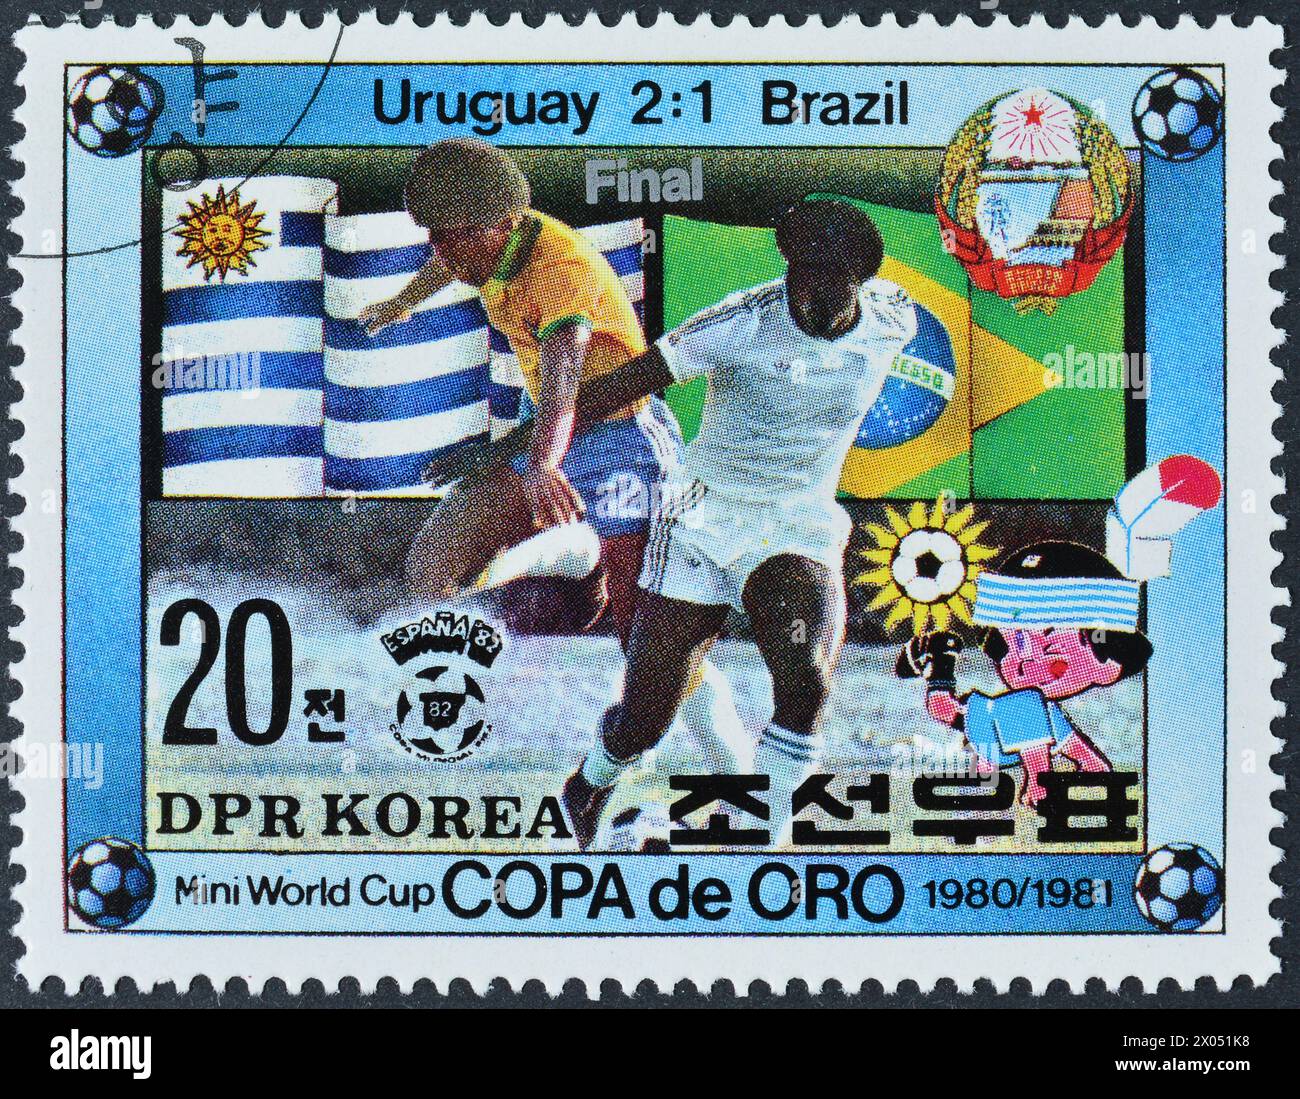 Cancelled postage stamp printed by North Korea, that promotes Football Championship Copa de Oro, Uruguay 19801981, circa 1981. Stock Photo